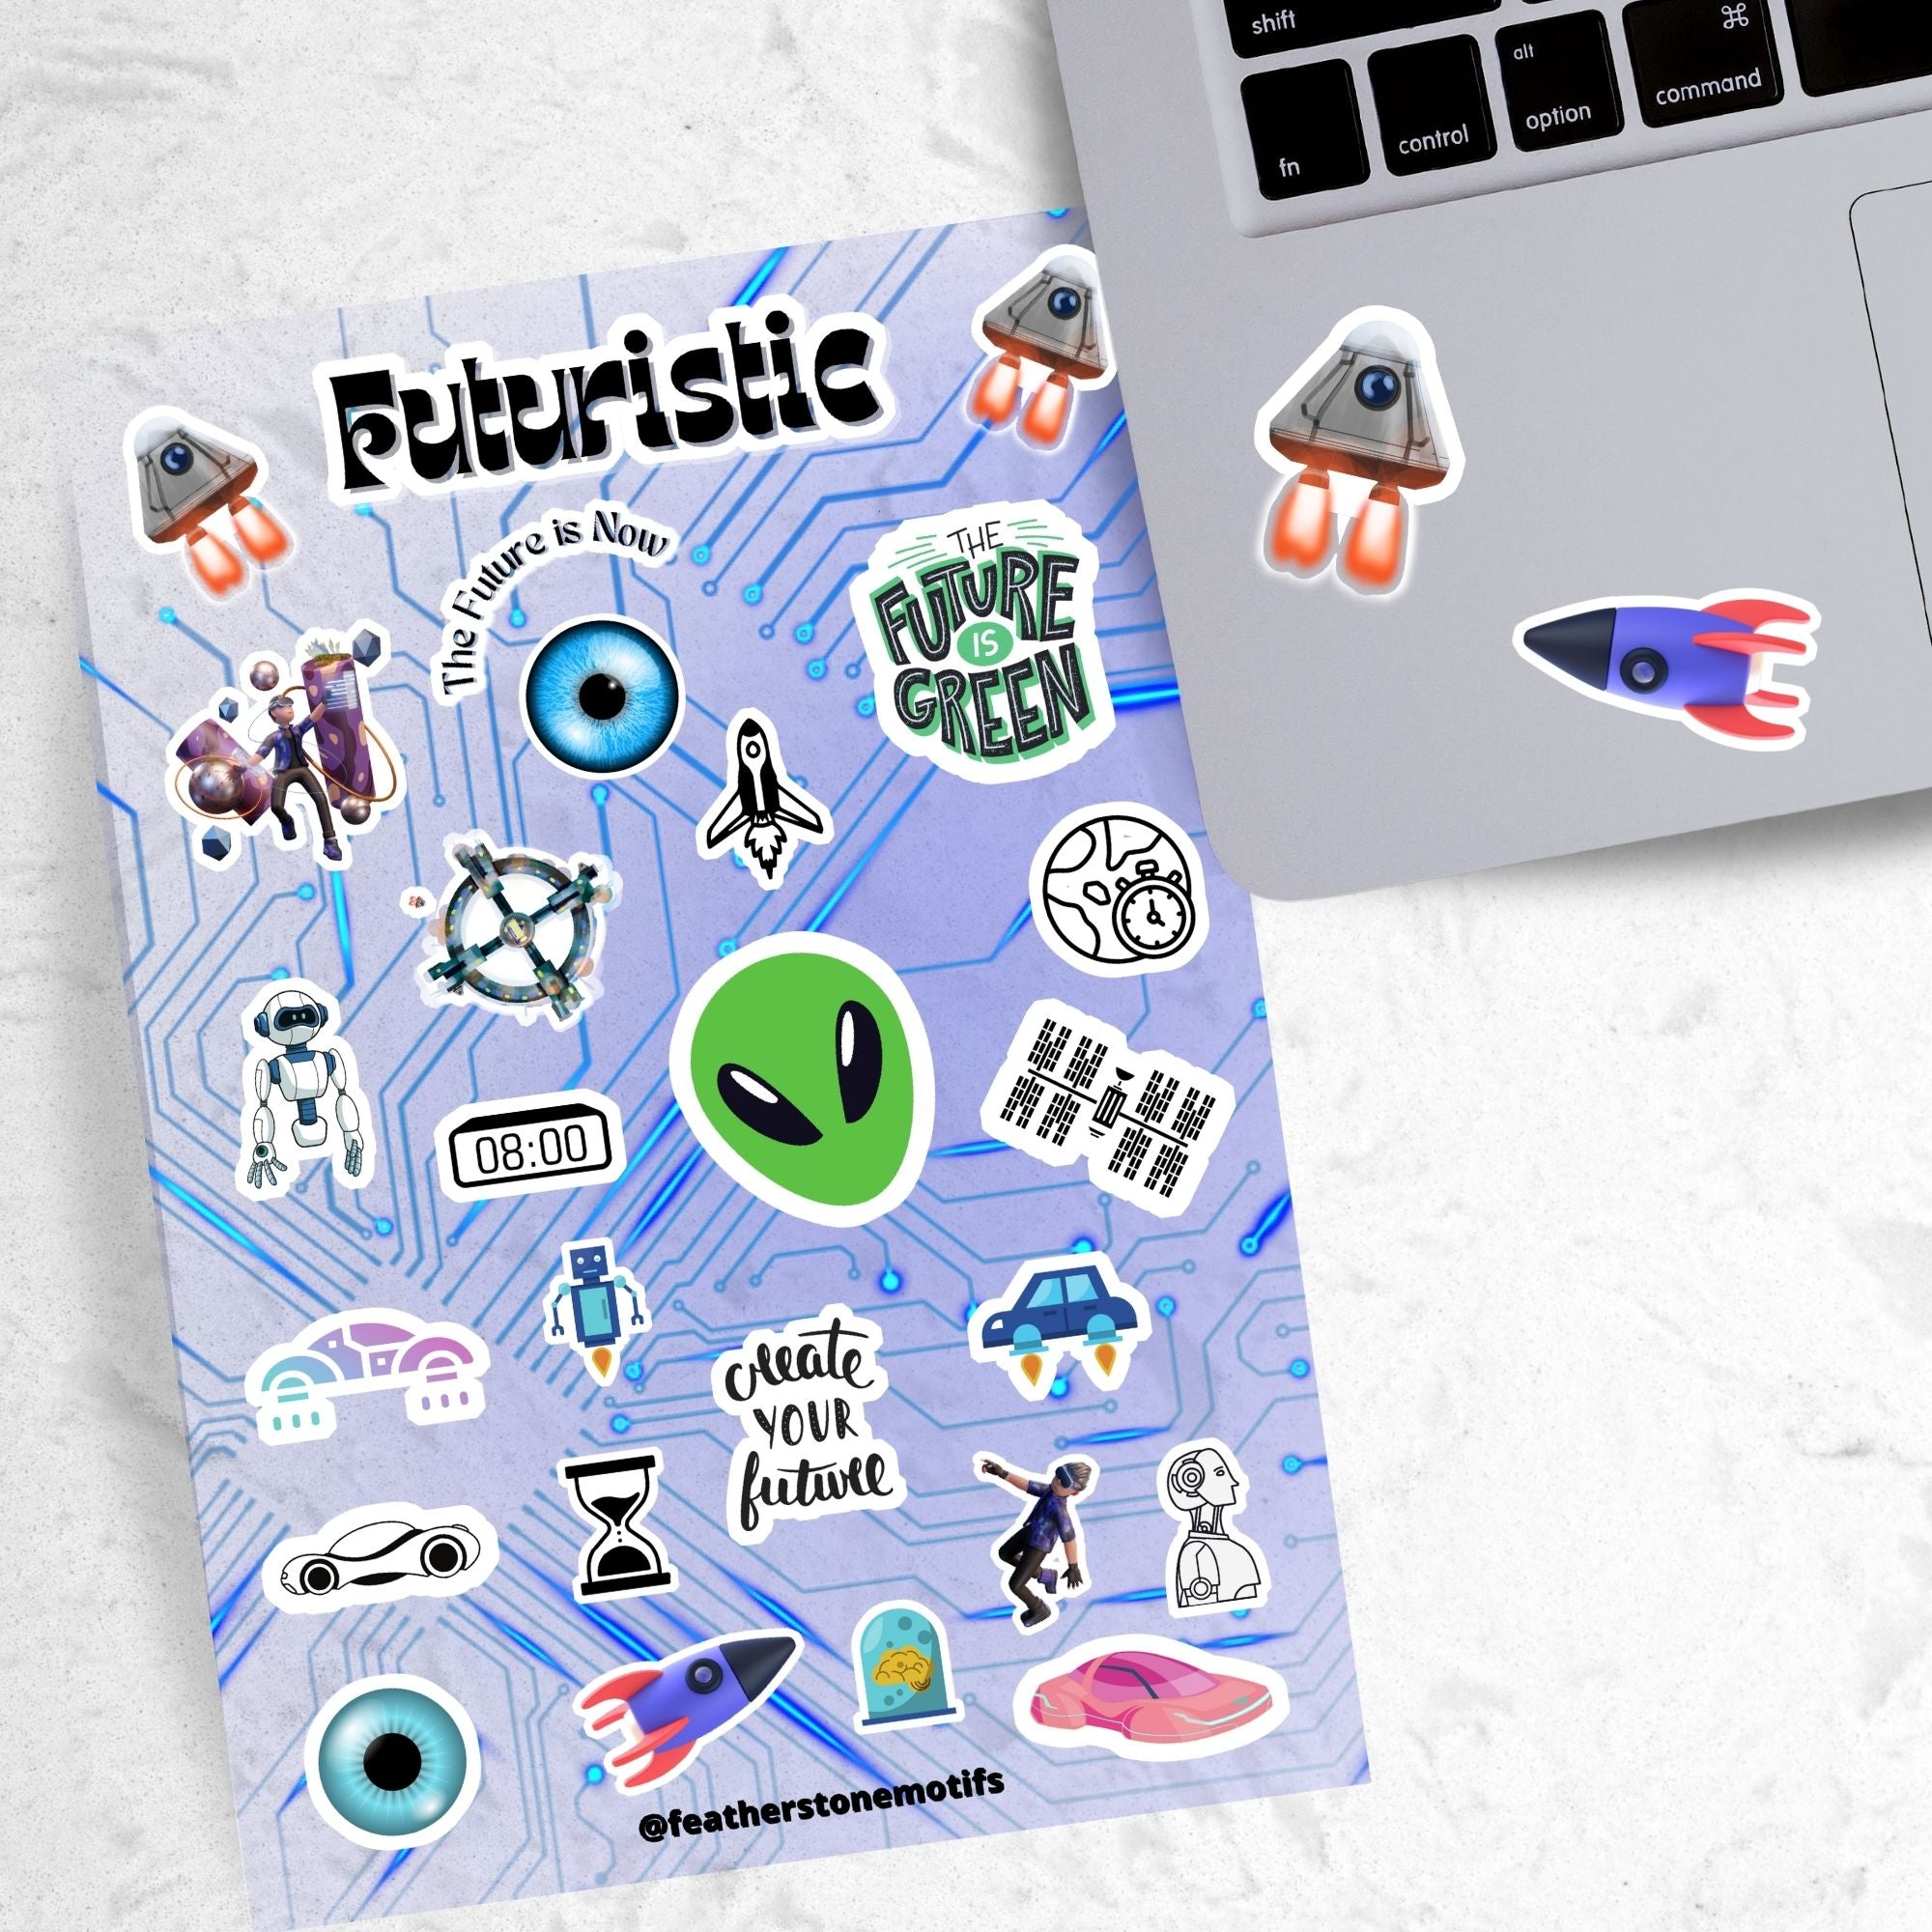 Set on a background of a circuit board, this sticker sheet is filled with futuristic sticker images like rocket ships, flying cars, aliens, and robots, and it has a holographic star overlay! This image shows the sticker sheet next to an open laptop with two different rocket stickers applied below the keyboard.